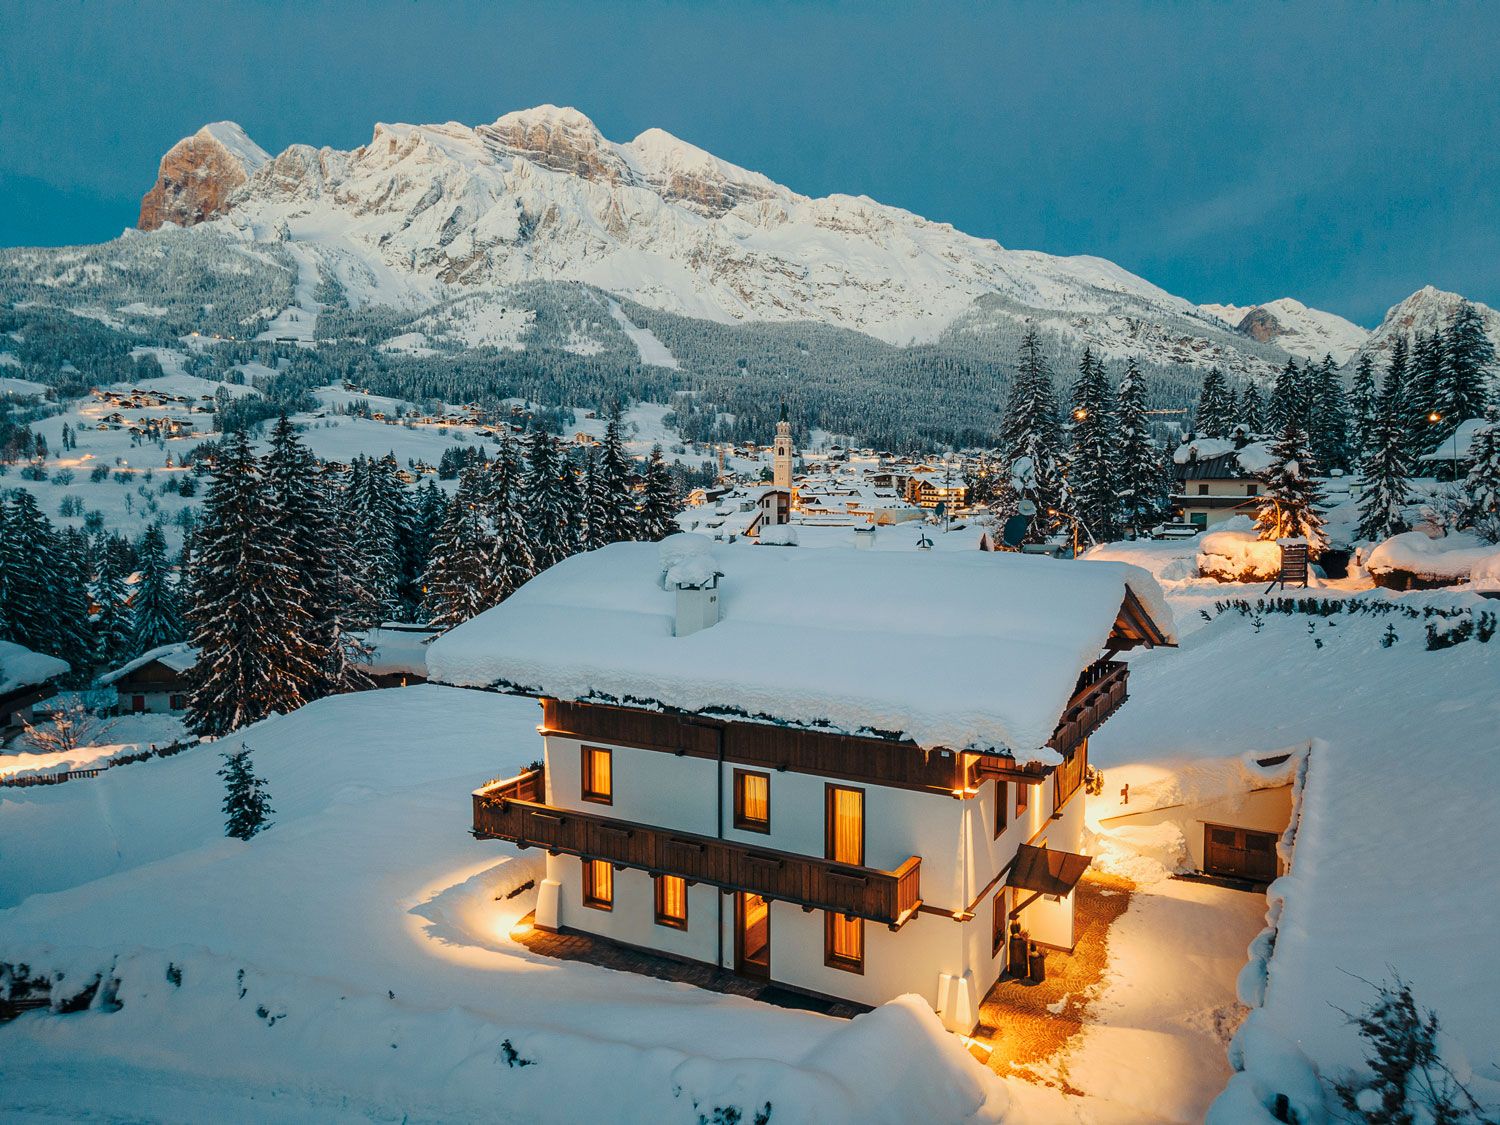 LV01 Dolce Vita. View of Dolomites luxury ski chalet and mountains behind at dusk.